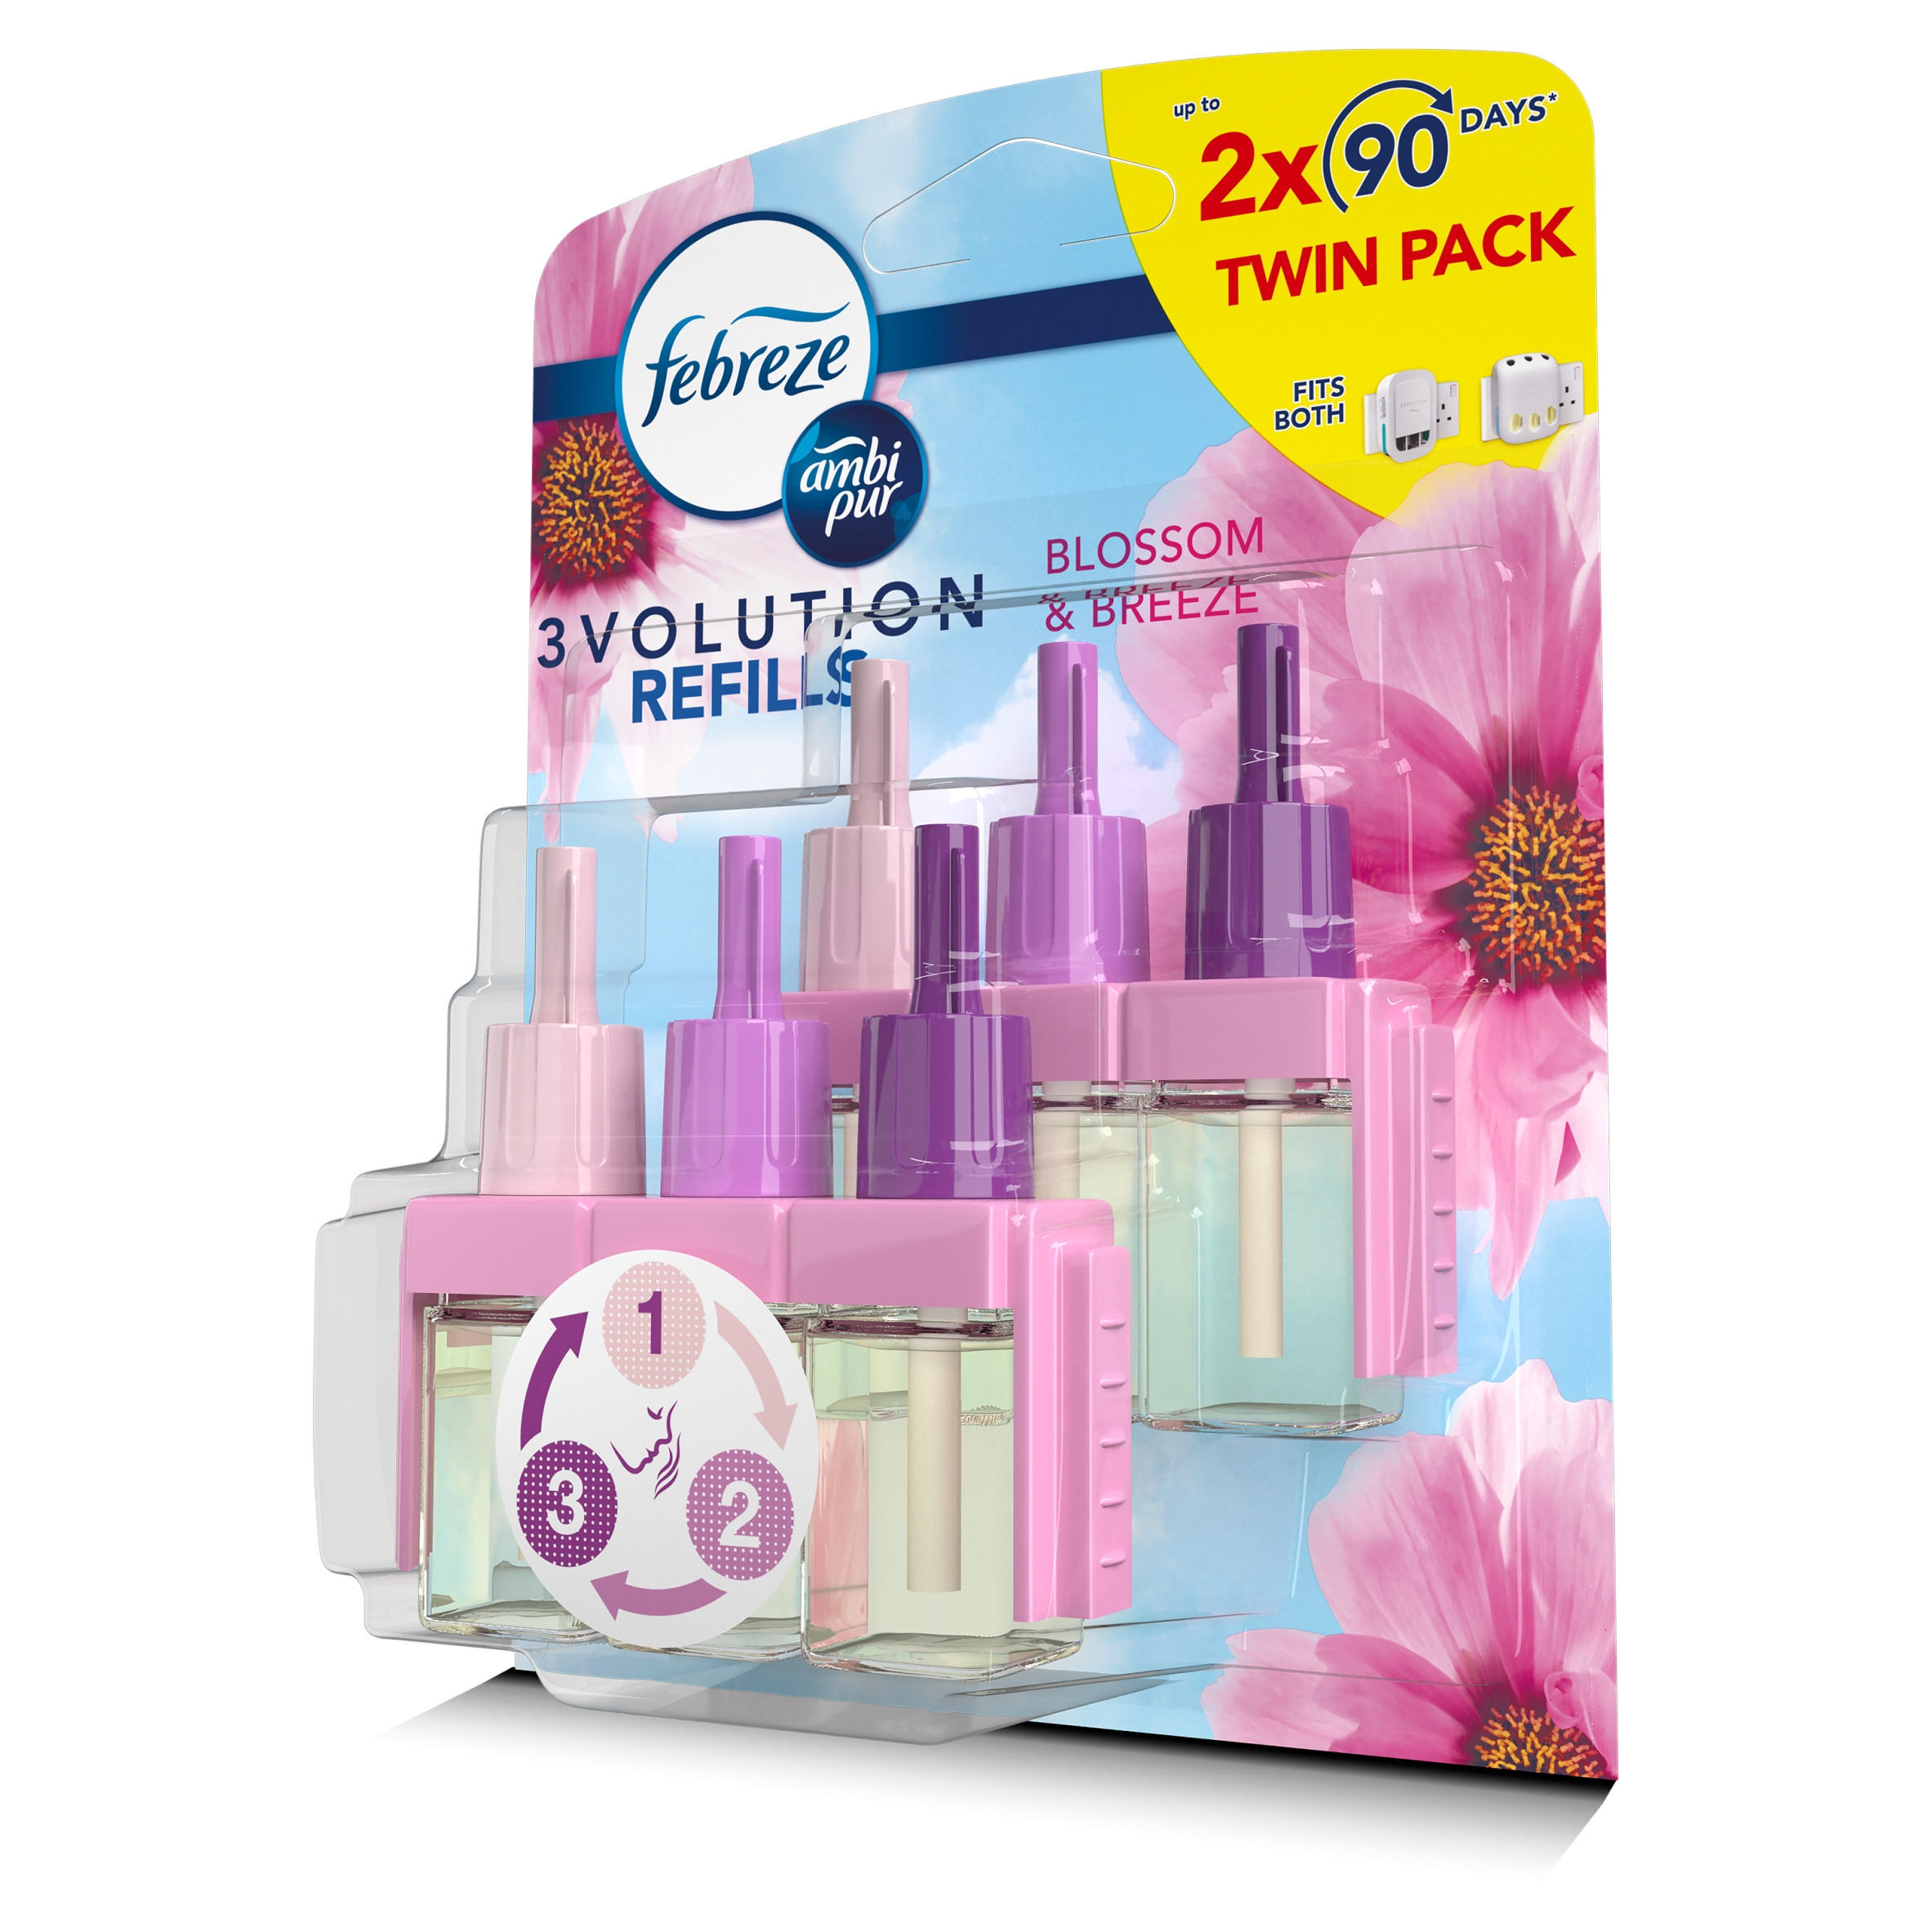 Febreze 3Volution Air Freshener Plug In Refill Blossom & Breeze Twin Pack  2x20ML, Home Accessories